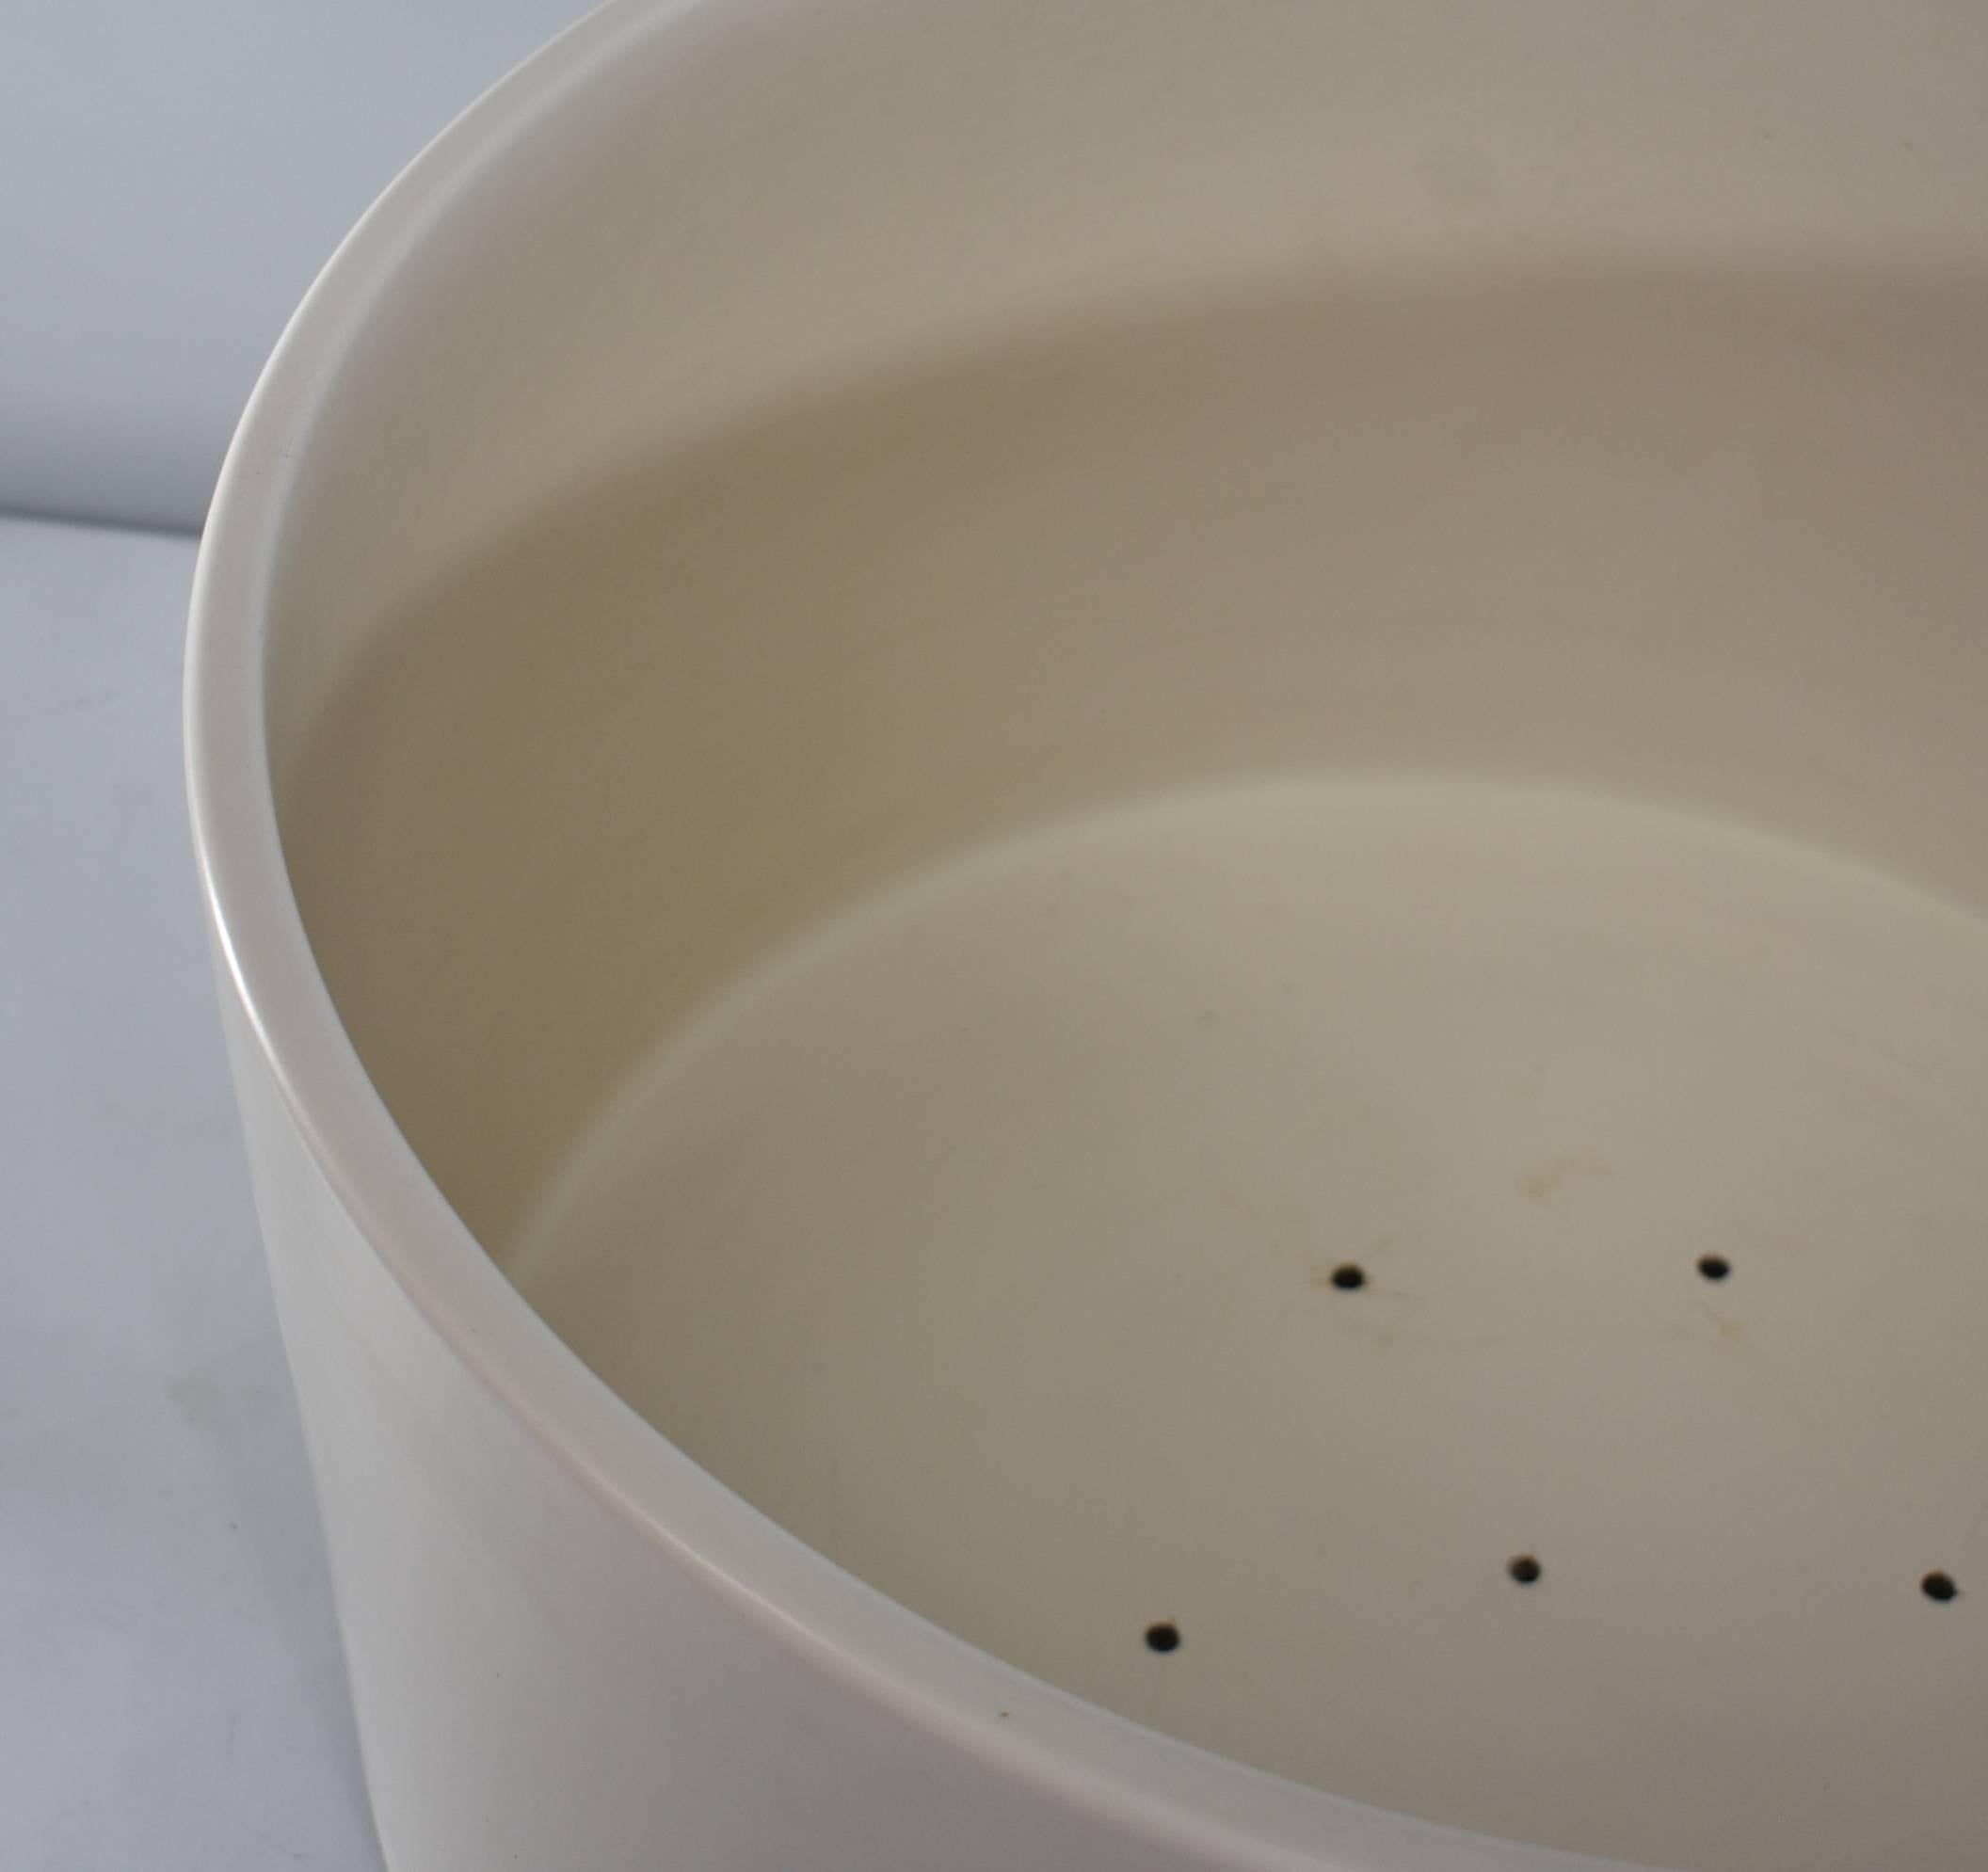 Large oversized matte cream ceramic planter in the style of Gainy. Drain holes have been drilled in the bottom. Very heavy. A few small pin holes in the glaze.